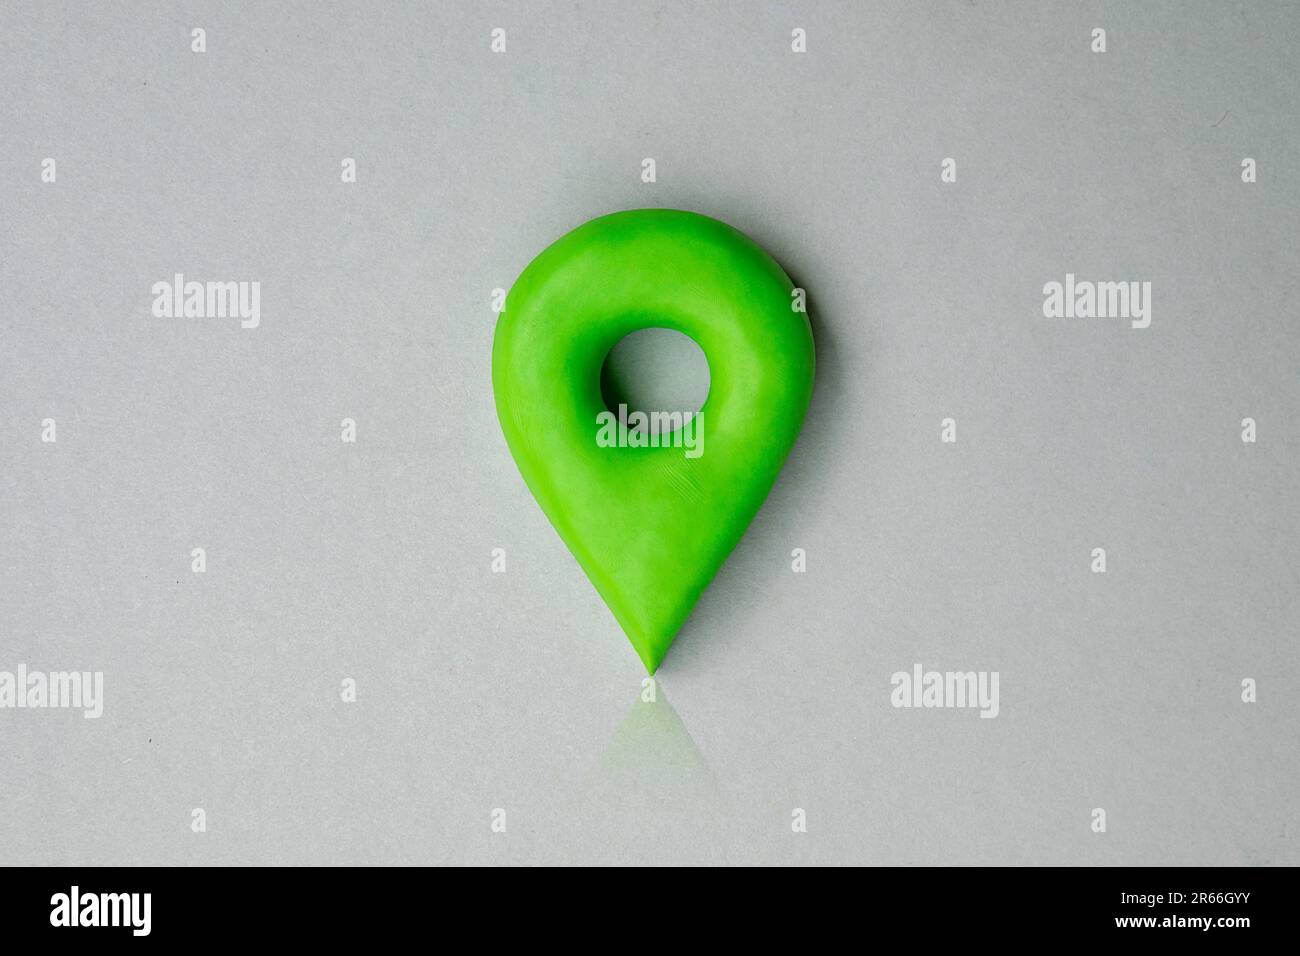 Green location symbol of pin on blue background, 3d GPS pin icon made of plasticine, location concept. Stock Photo